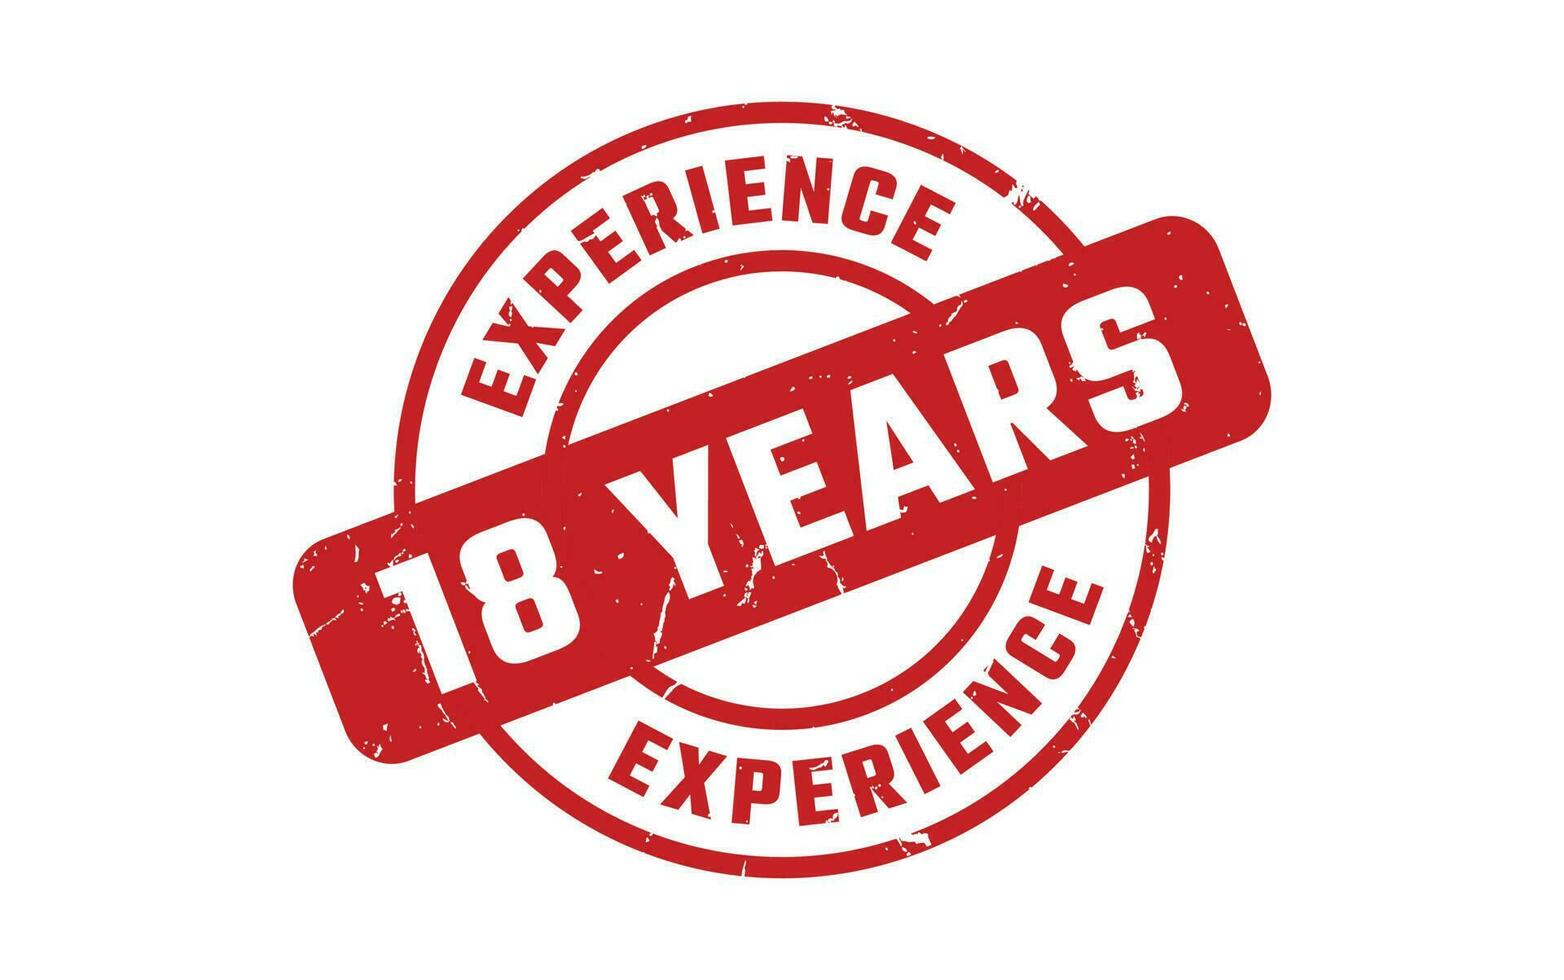 18 Years Experience Rubber Stamp vector